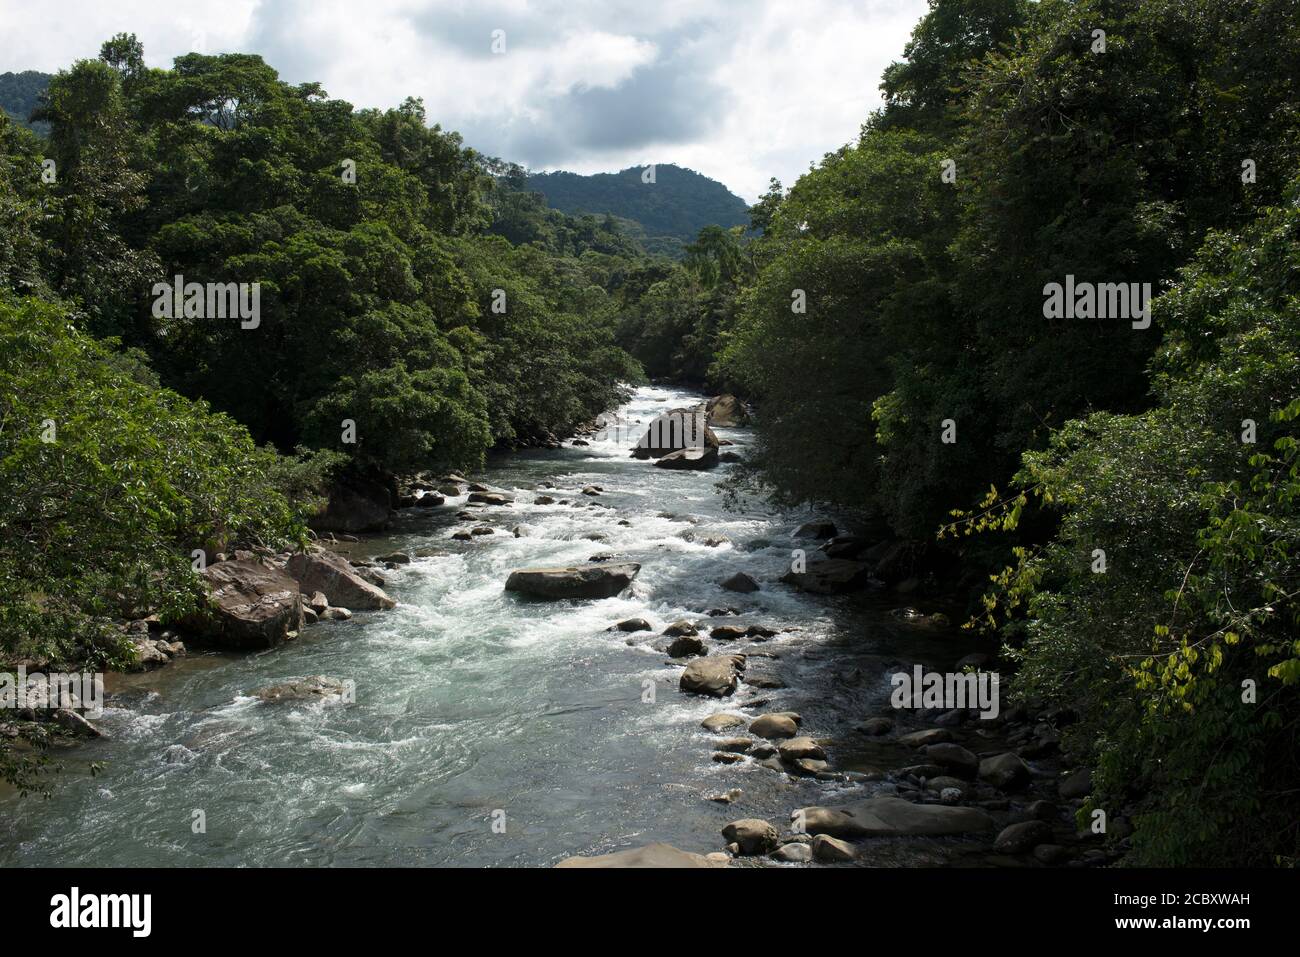 A river forms the boundary of Panama's indigenous Ngäbe-Bugle comarca (reservation). Stock Photo